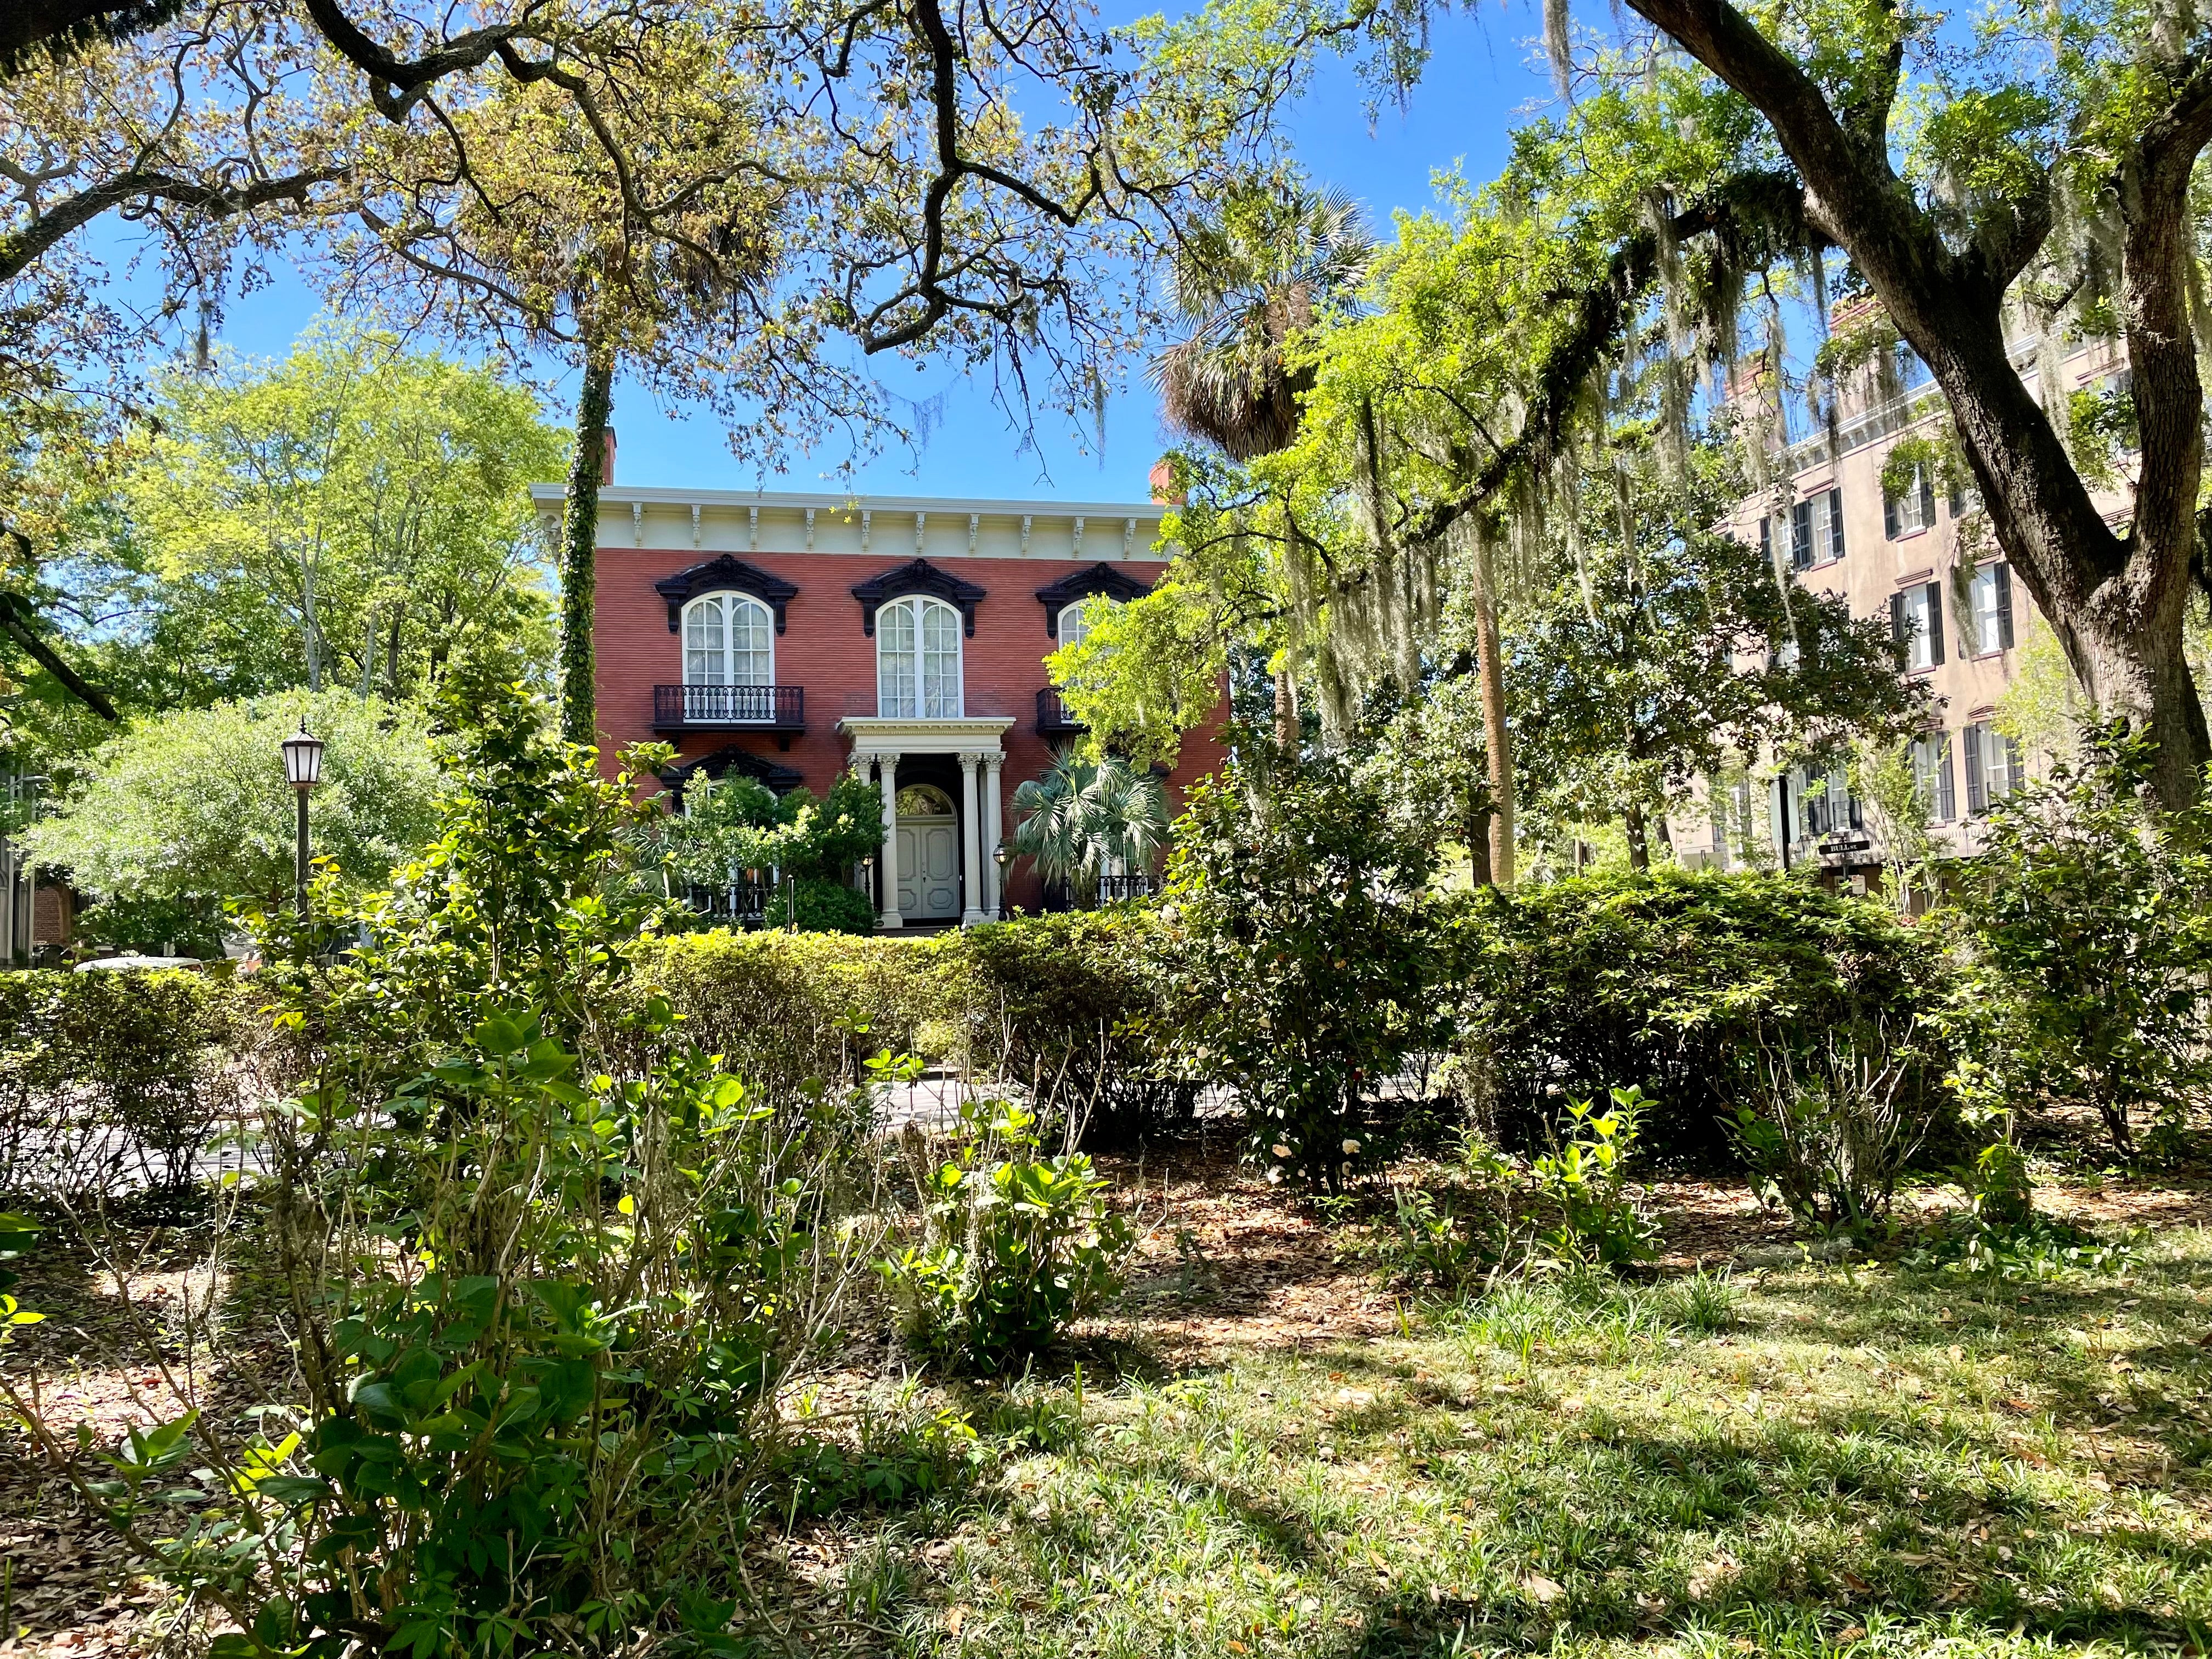 You could easily while away a day strolling through Savannah’s pretty squares